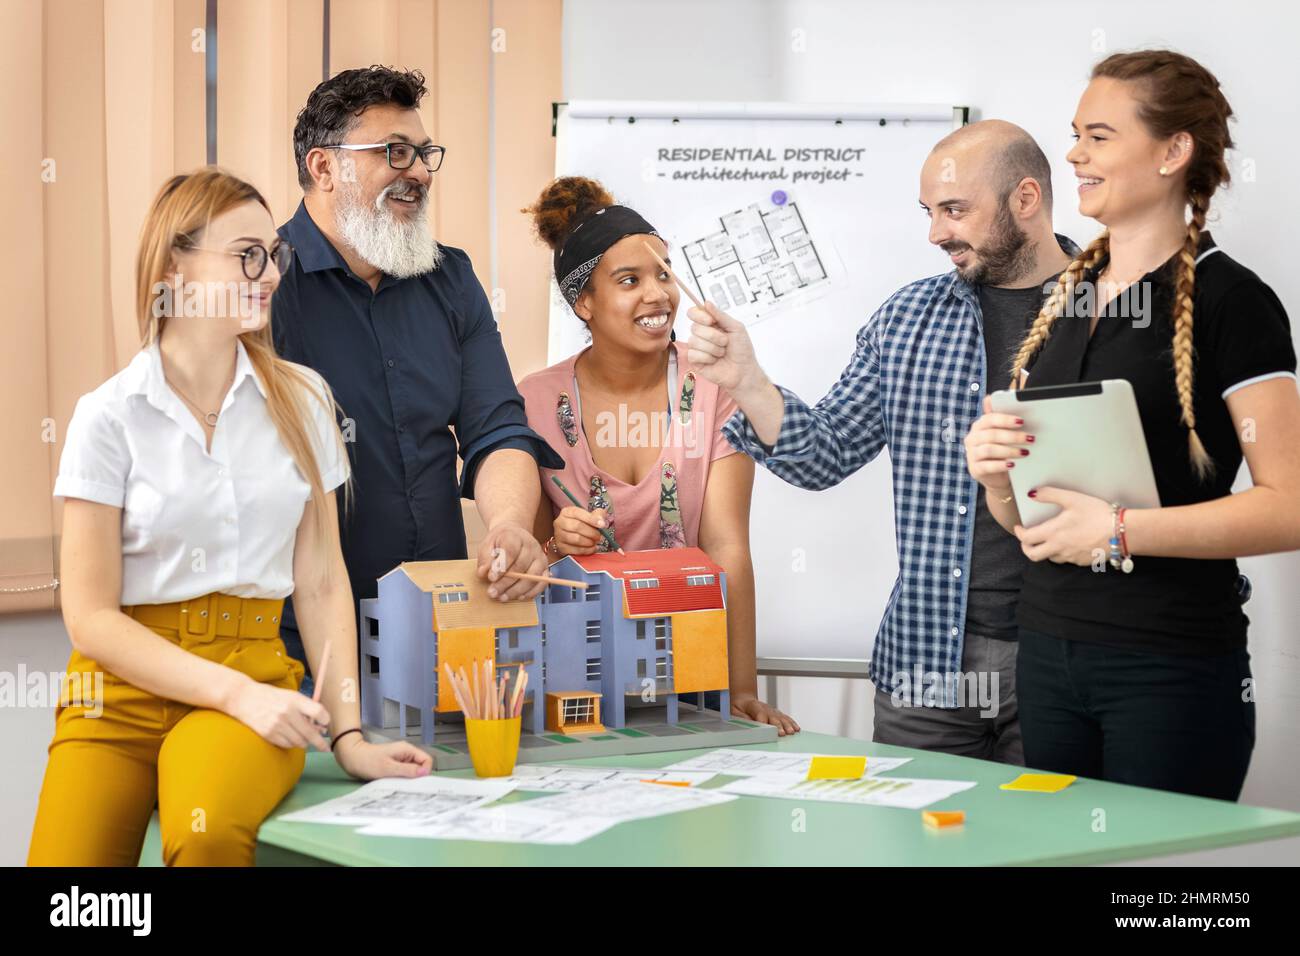 Team of mixed multiethnic architects working on construction plans in meeting room Stock Photo